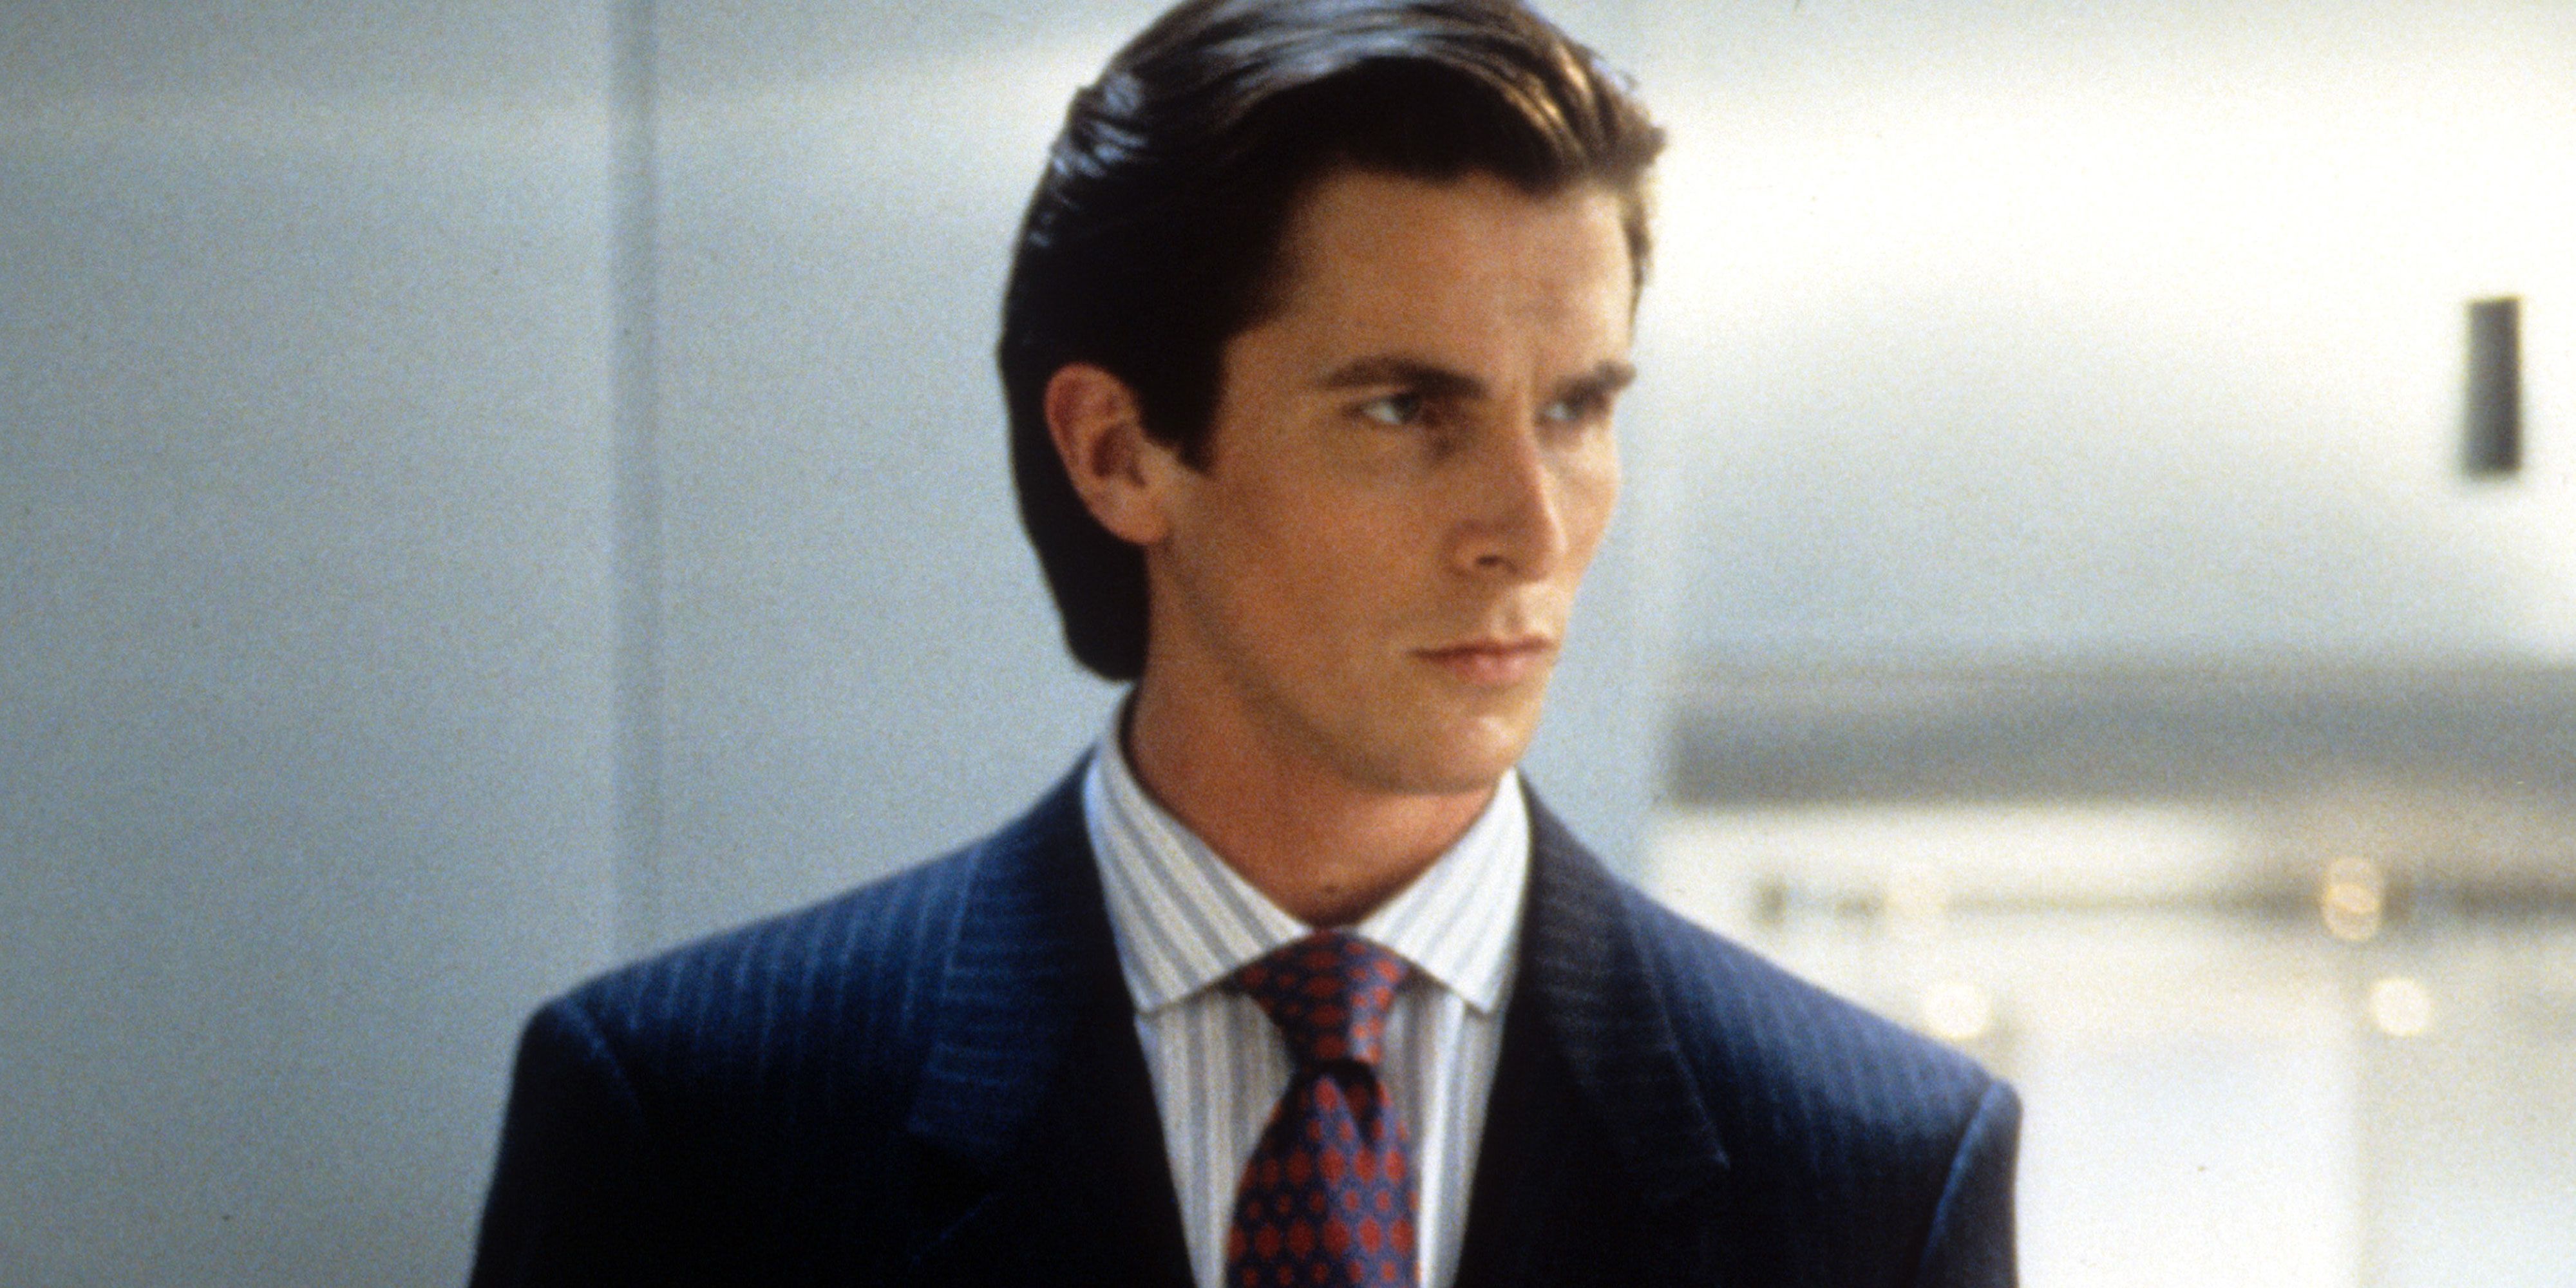 15 Best Patrick Bateman Quotes From American Psycho